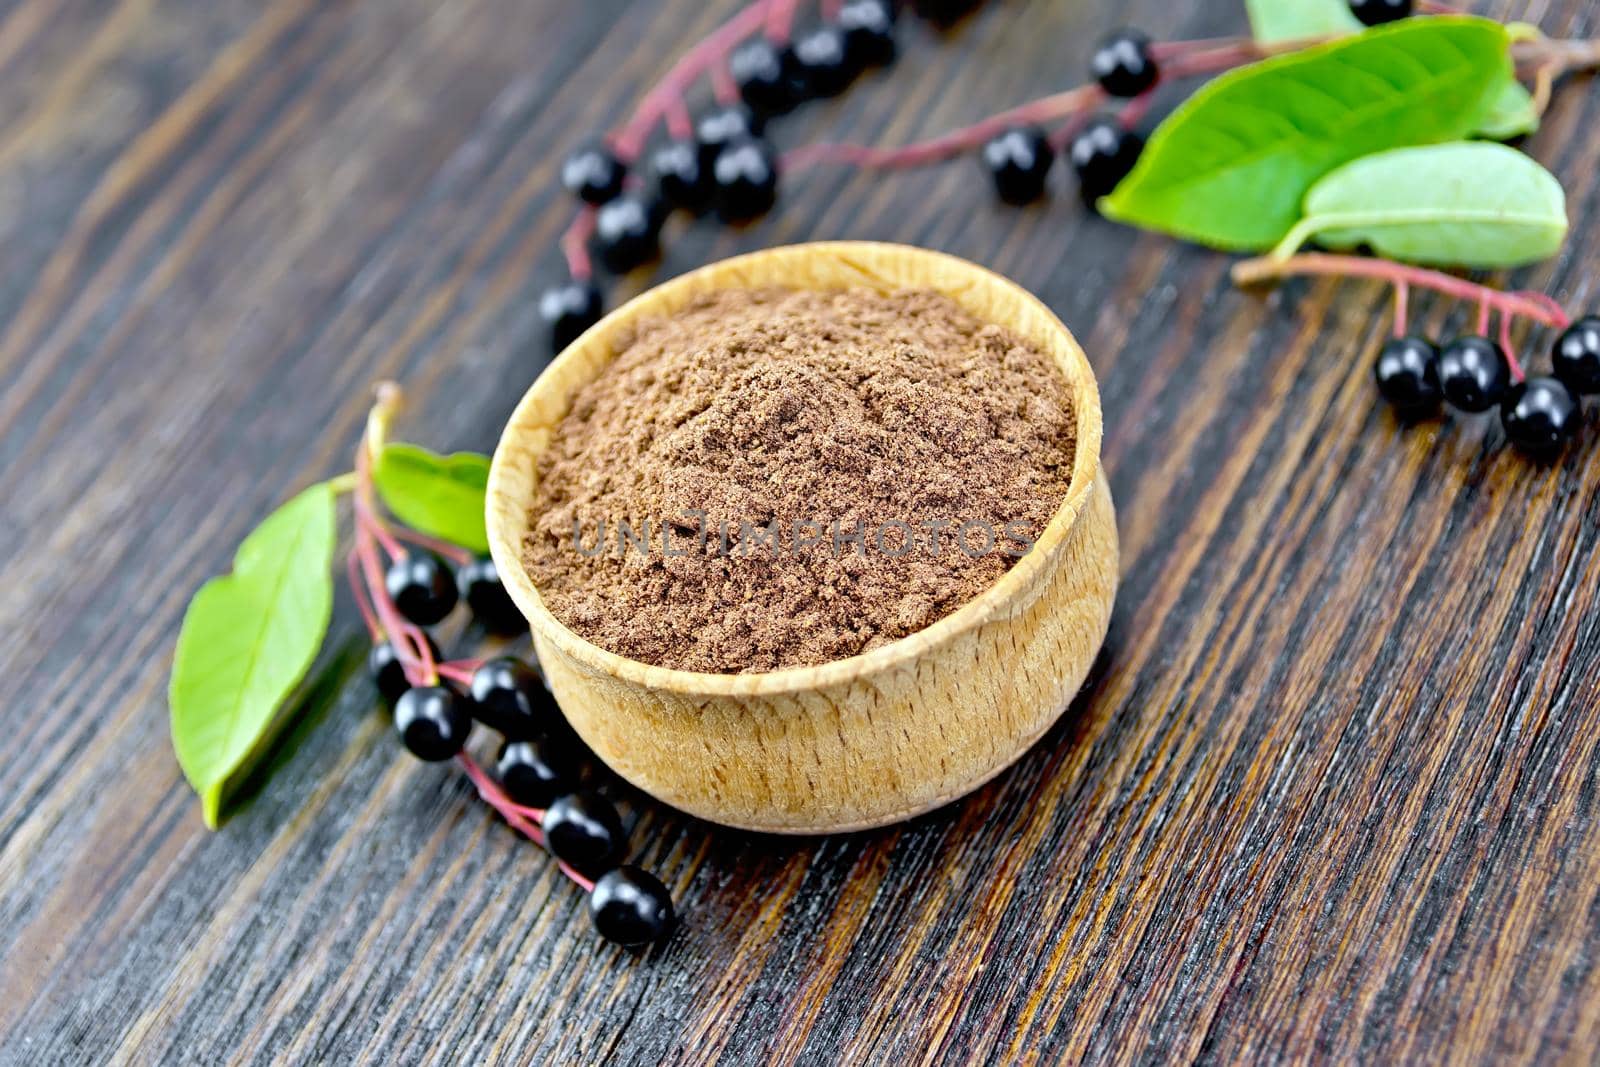 Flour of bird-cherry in a bowl with black berries on a background of wooden boards